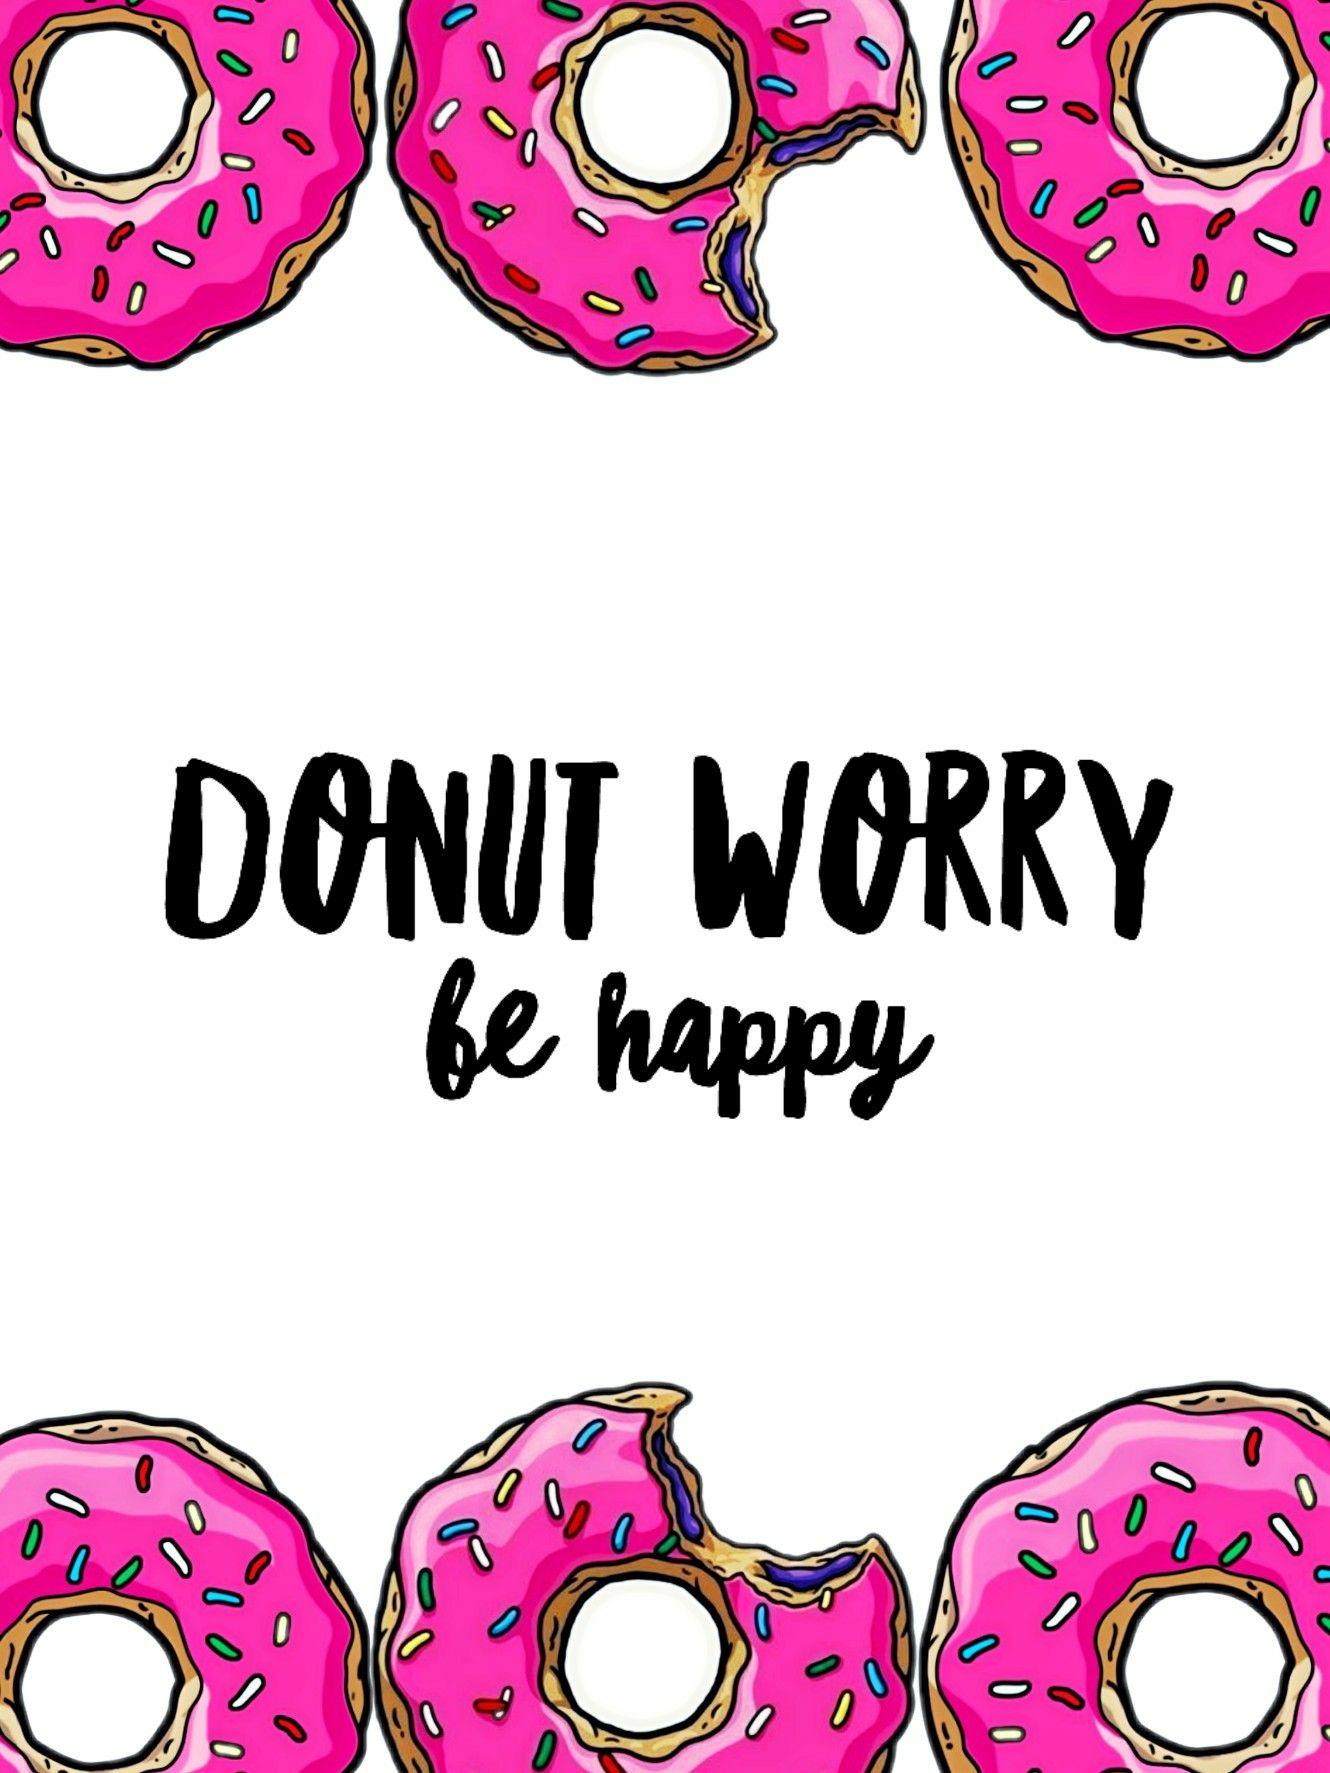 Drawing donuts wallpapers